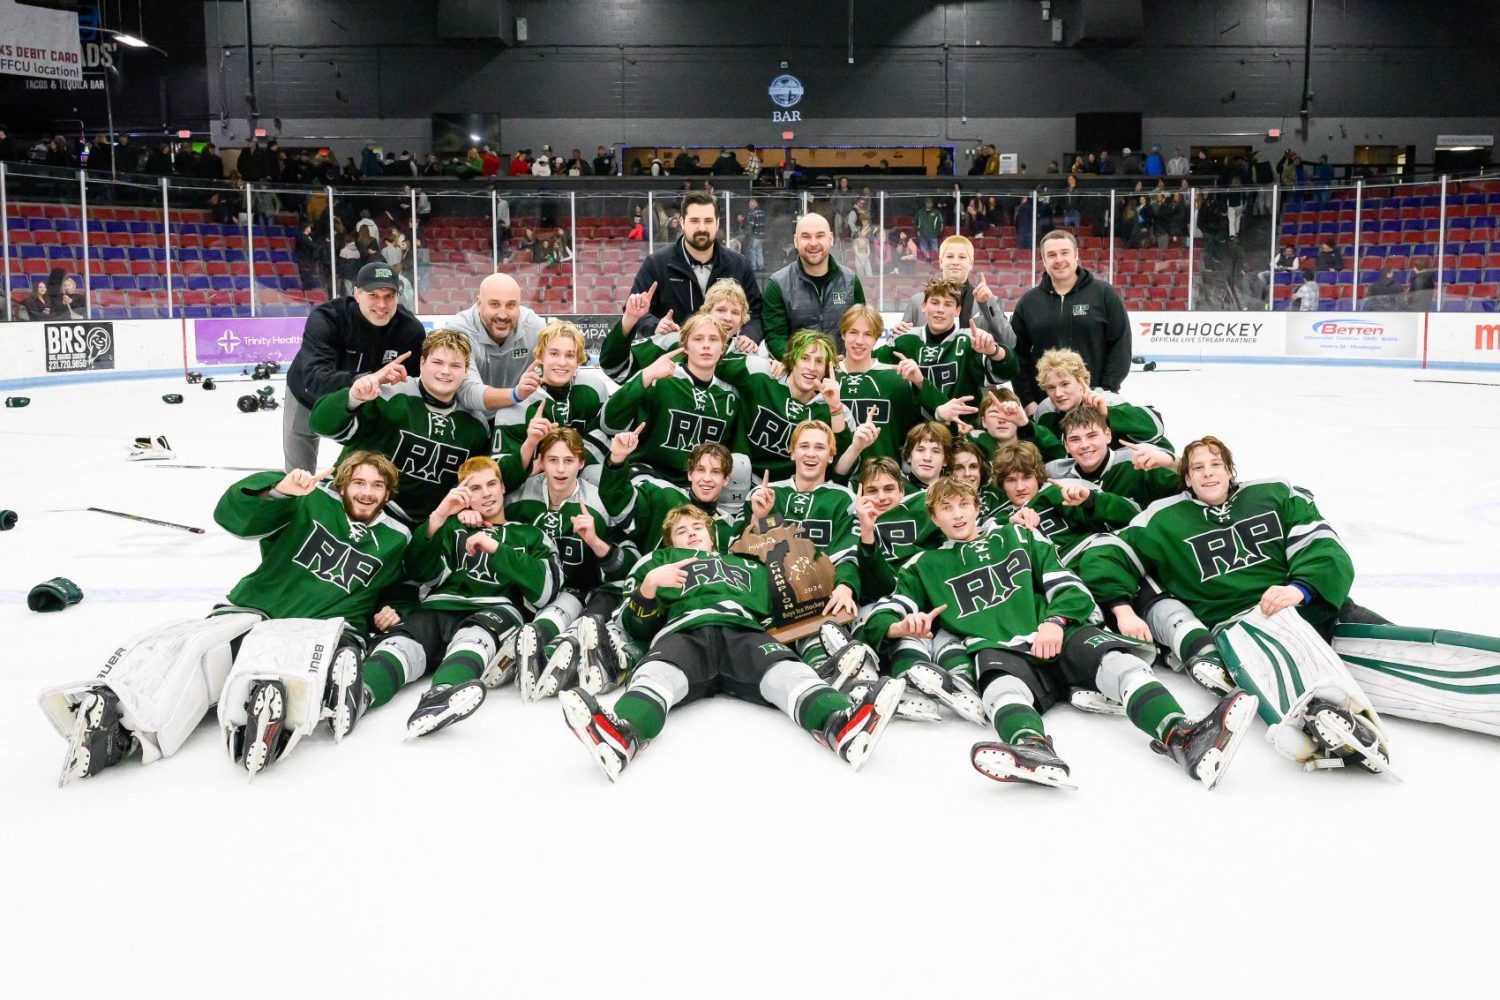 Hard-working Reeths-Puffer captures Division 1 hockey regional title, defeats Sparta, 6-2